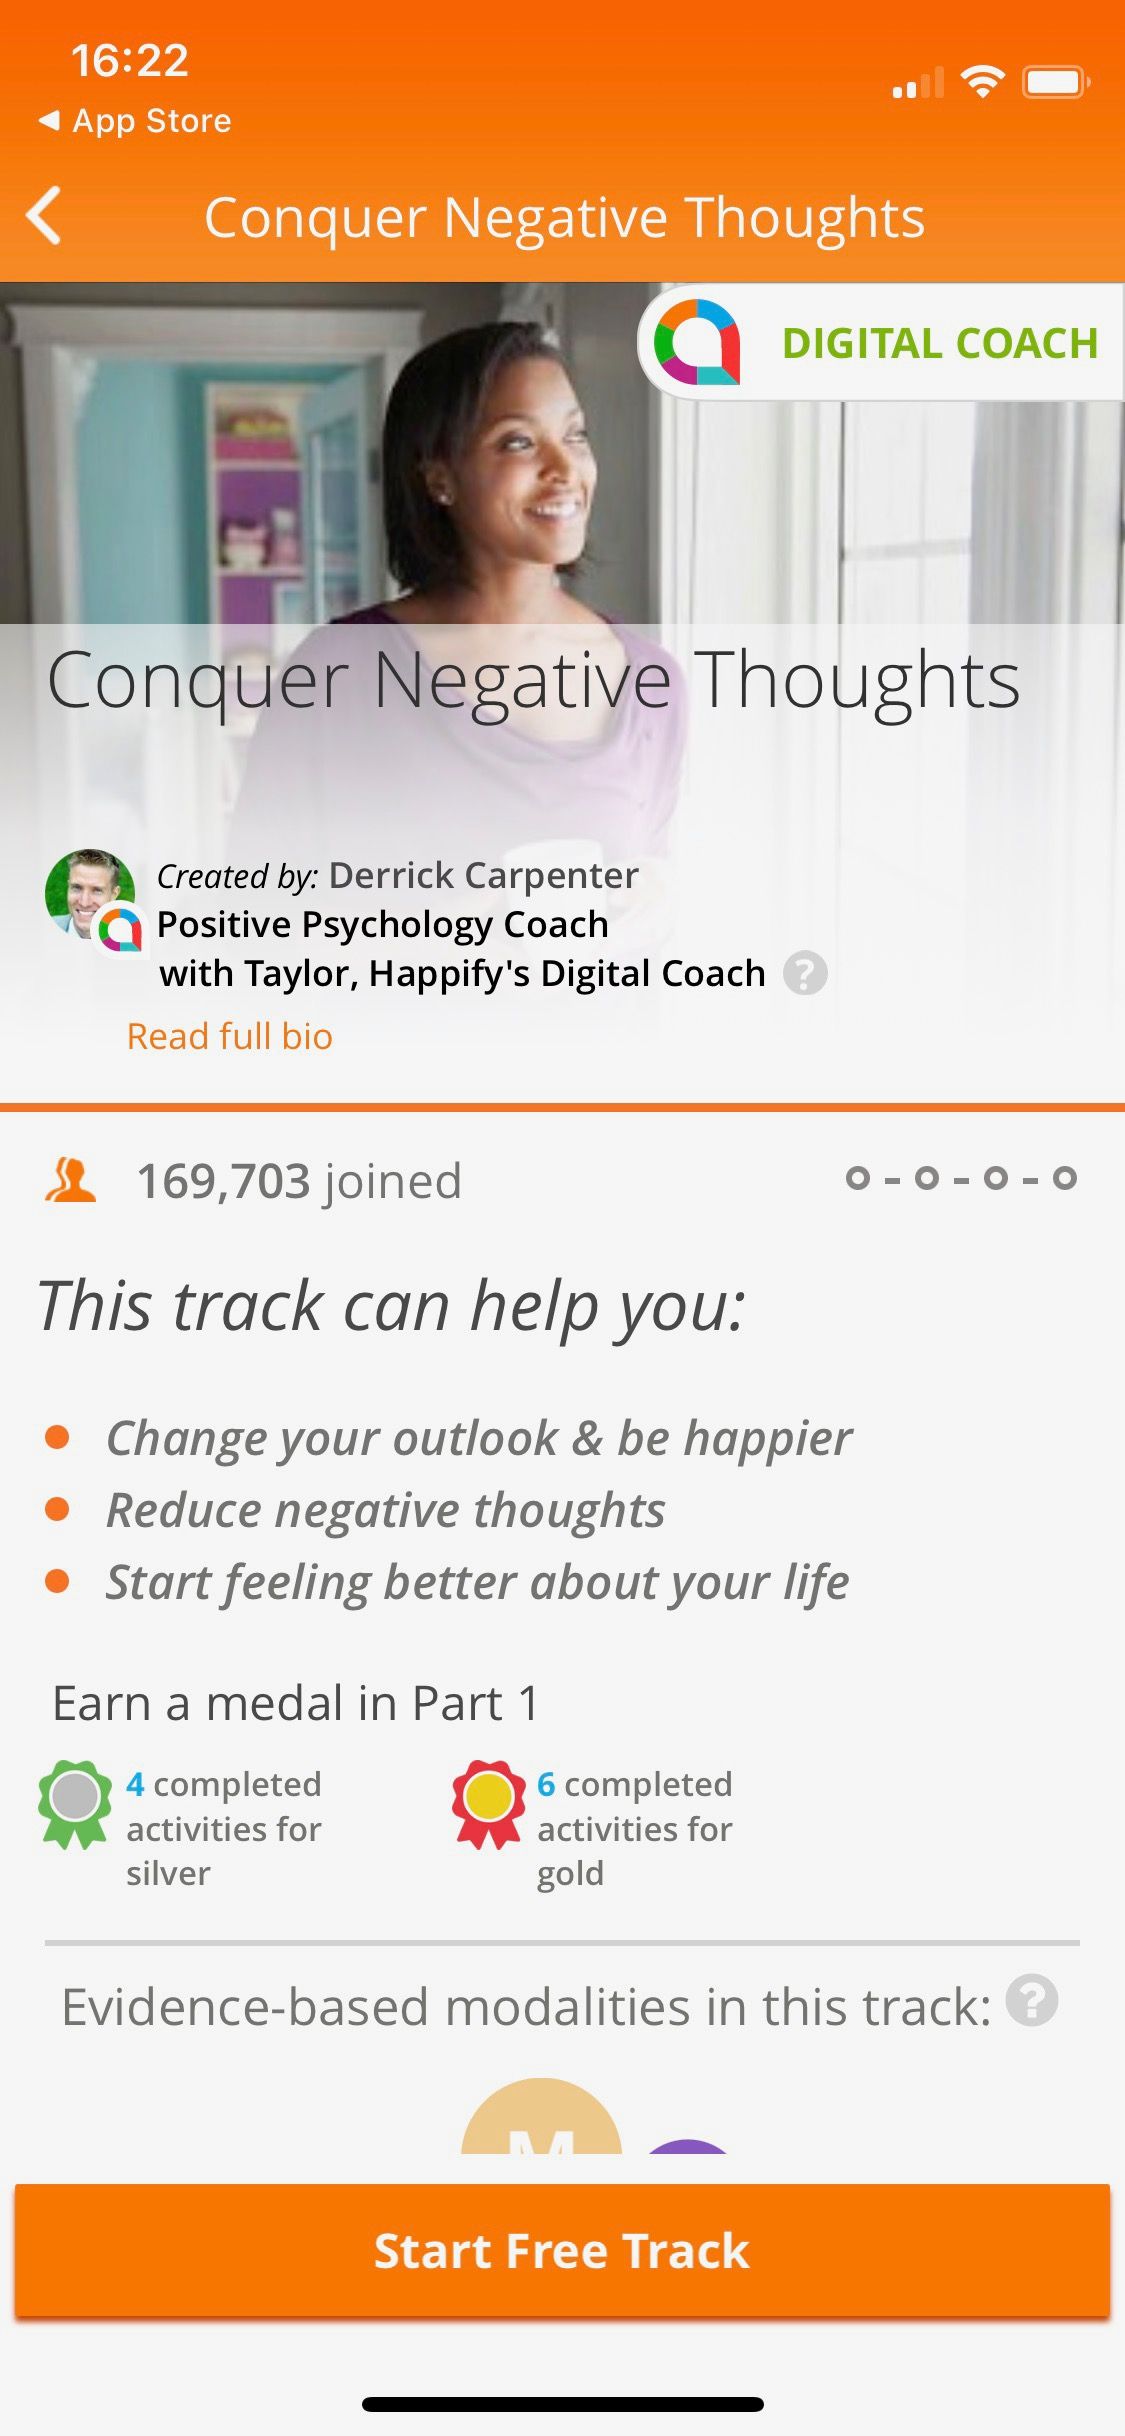 Screenshot of Happify app showing conquer negative thoughts track